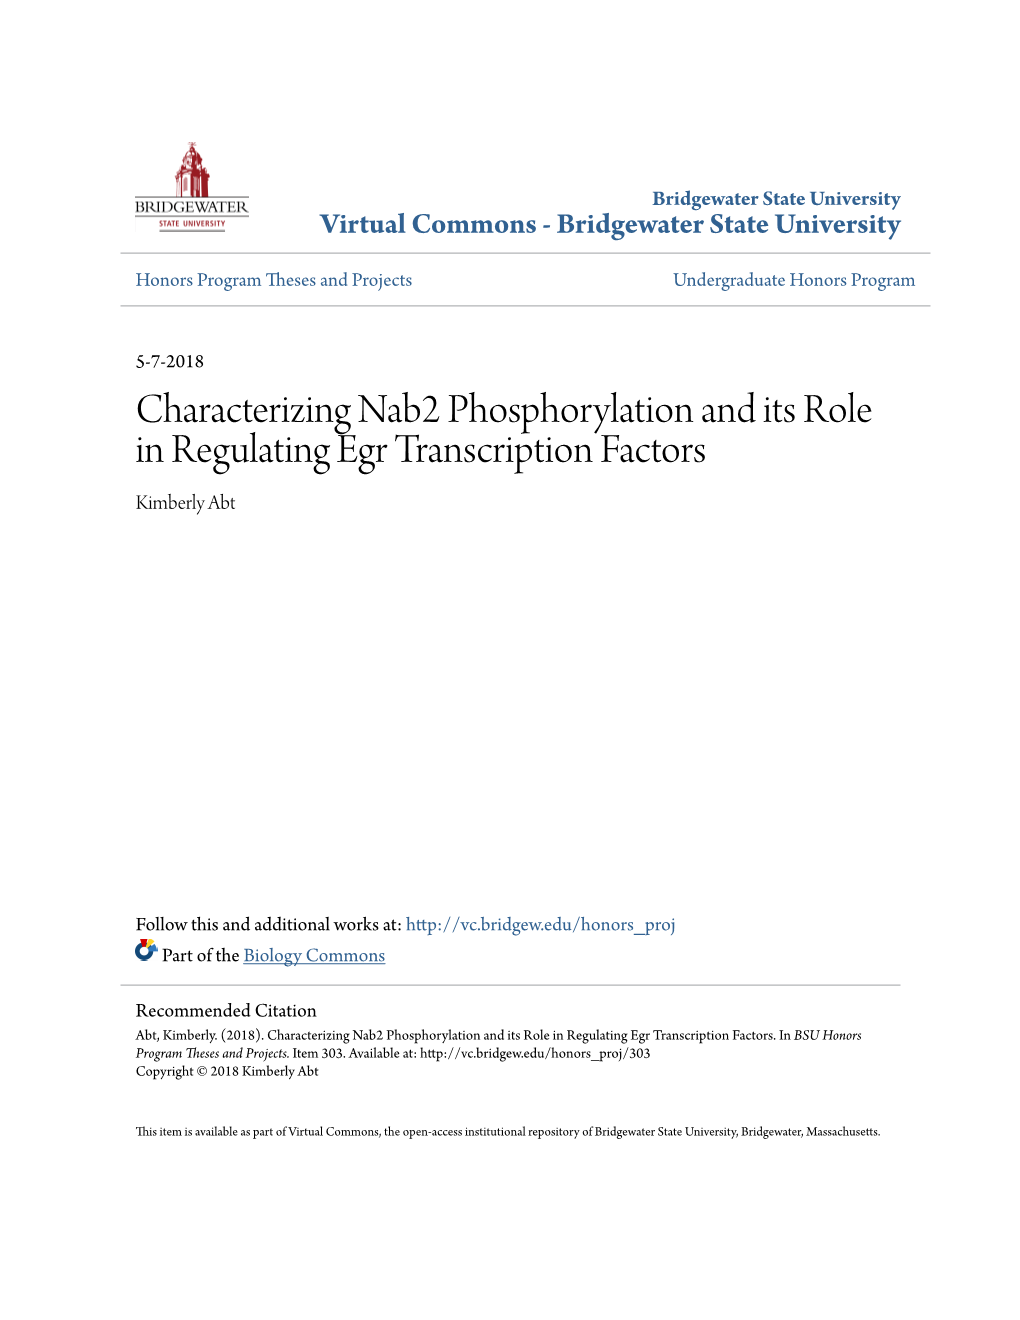 Characterizing Nab2 Phosphorylation and Its Role in Regulating Egr Transcription Factors Kimberly Abt